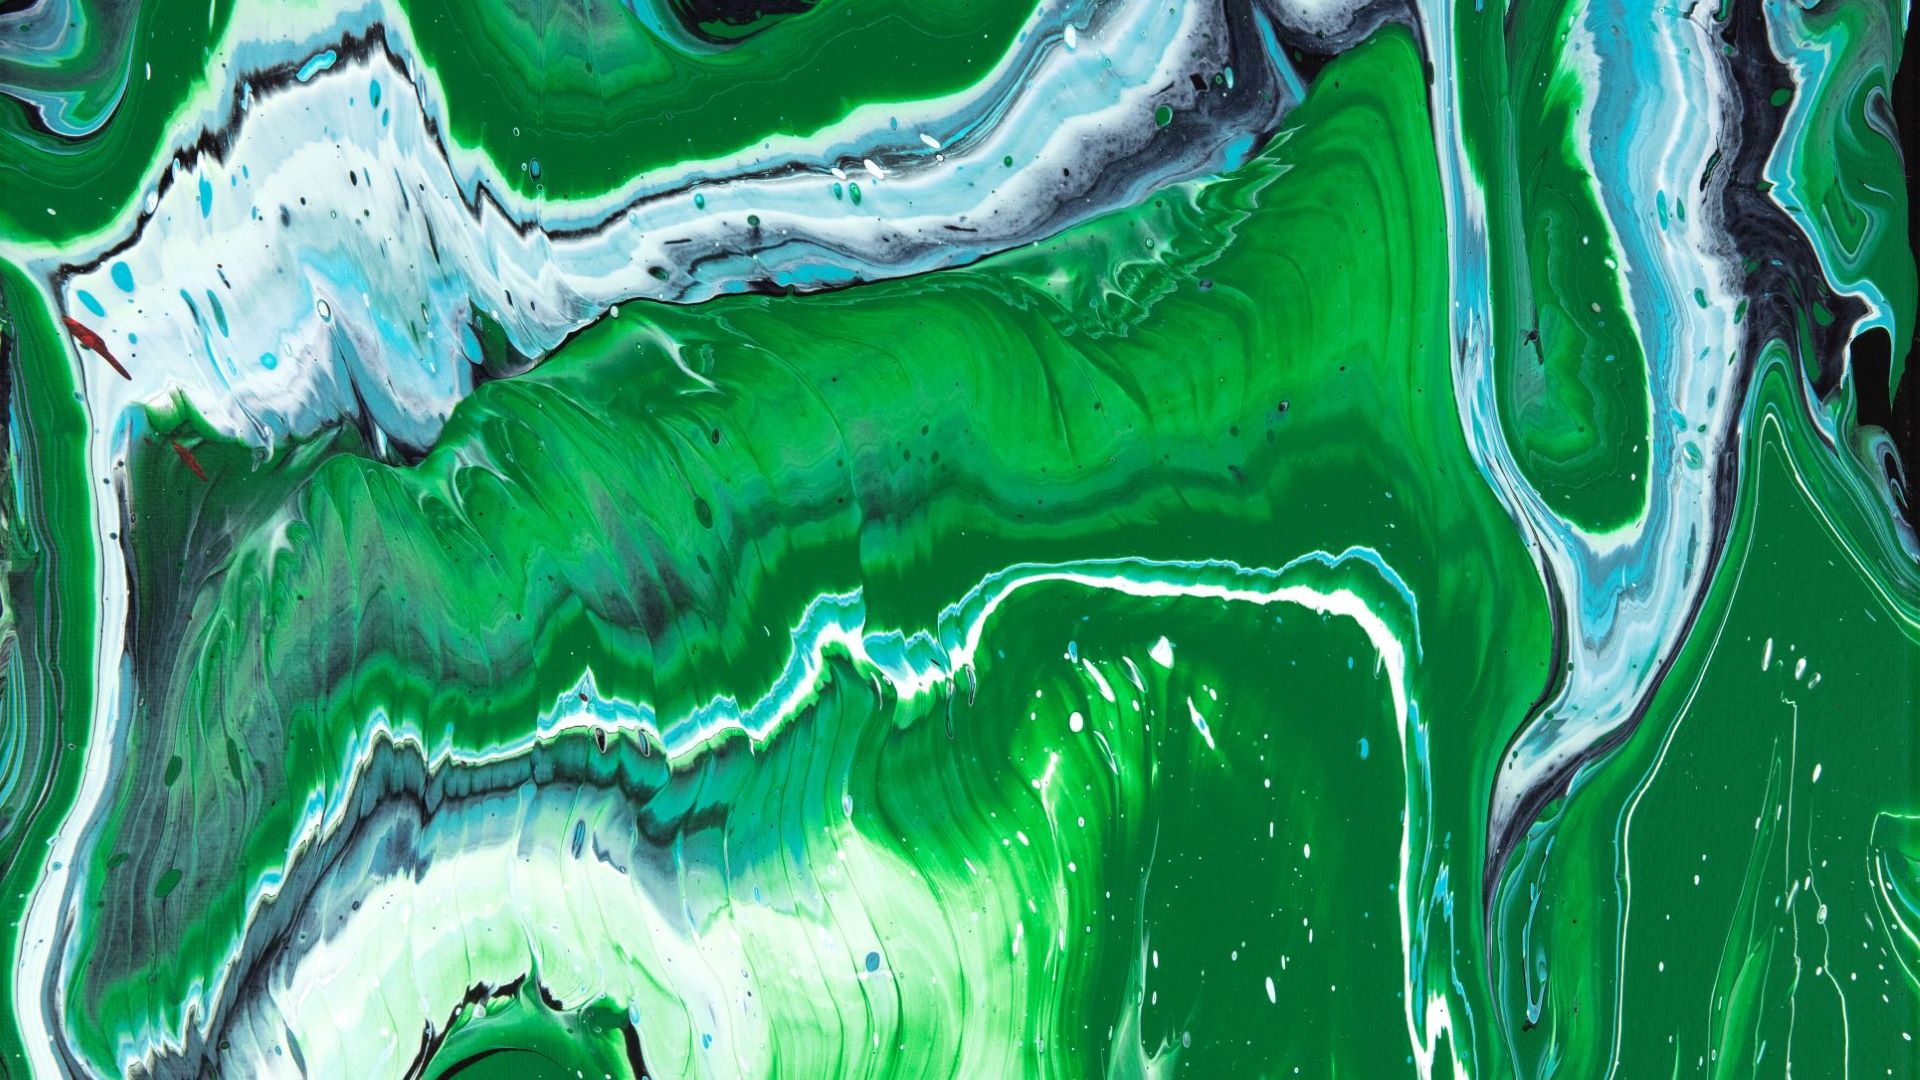 Utilizing a pouring technique with bright green, teal, black, and white acrylic paints, Wichman’s “Grassy Knoll,” measuring at 11 by 14 inches, moves with highly marbleized swirls throughout the canvas. The green is so bright and prevalent that one might start to smell fresh grass blades that make up one of the painting’s many swirls.